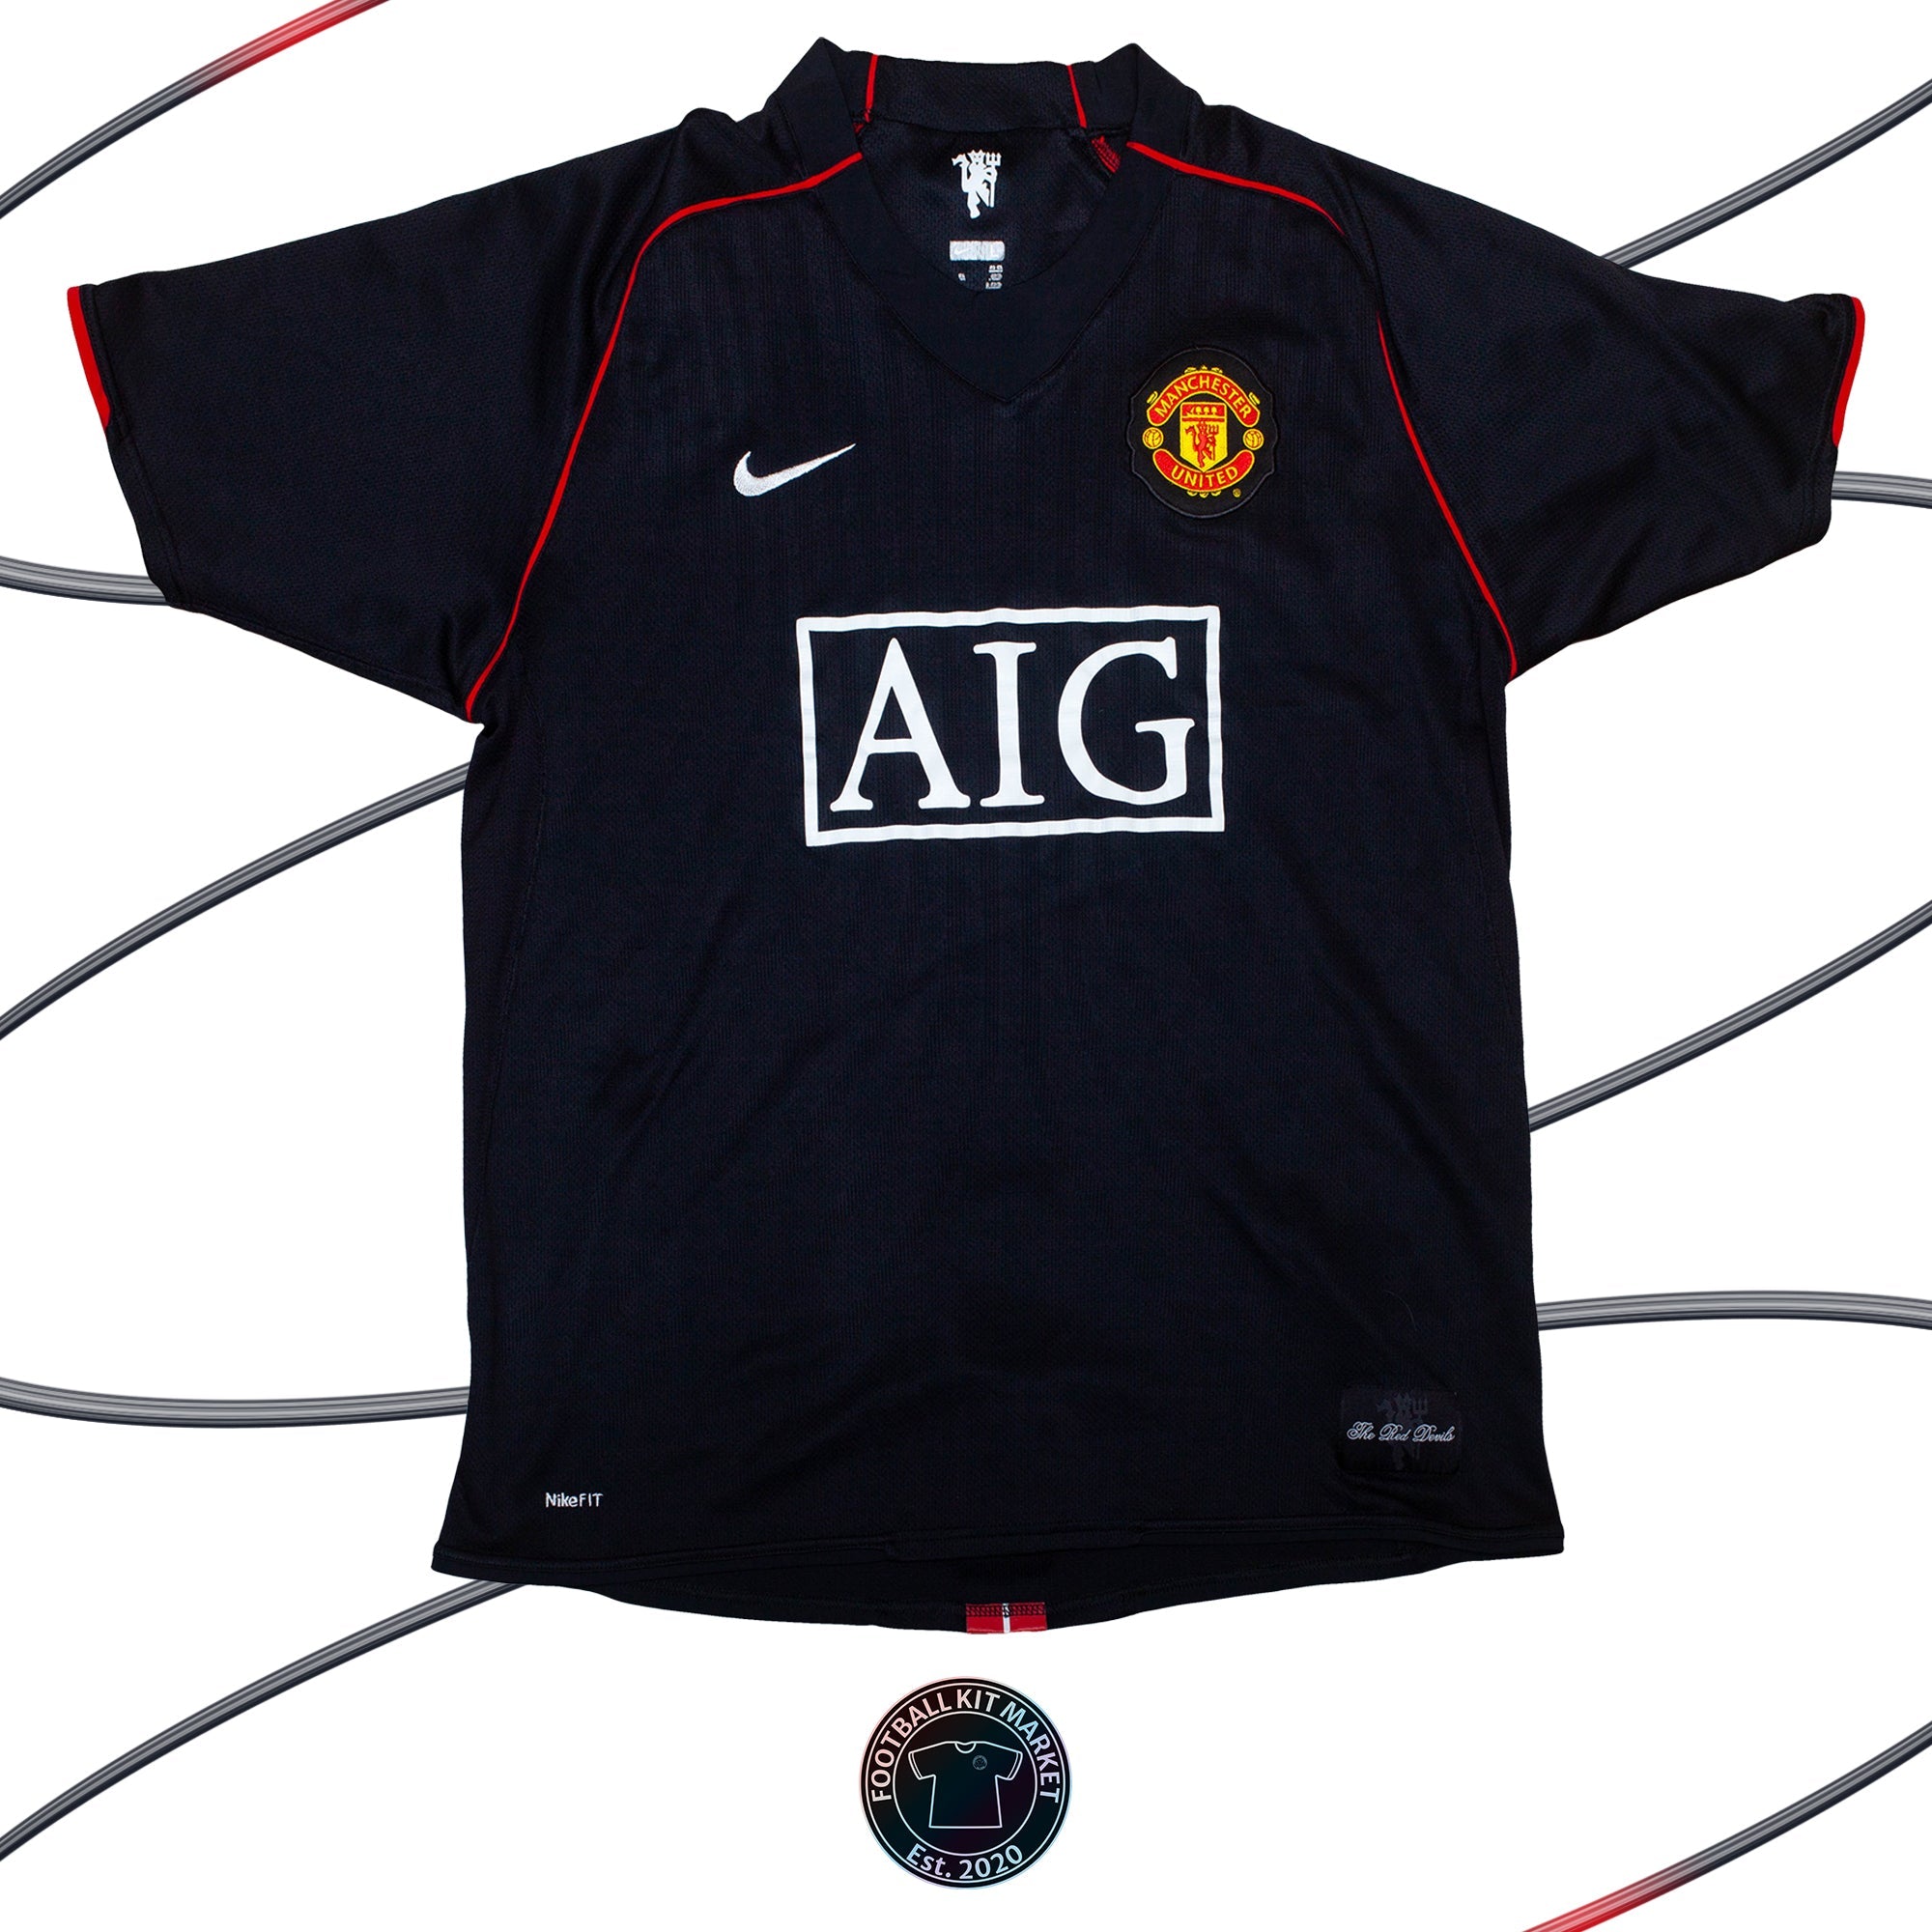 Genuine MANCHESTER UNITED Away Shirt (2007-2008) - NIKE (L) - Product Image from Football Kit Market